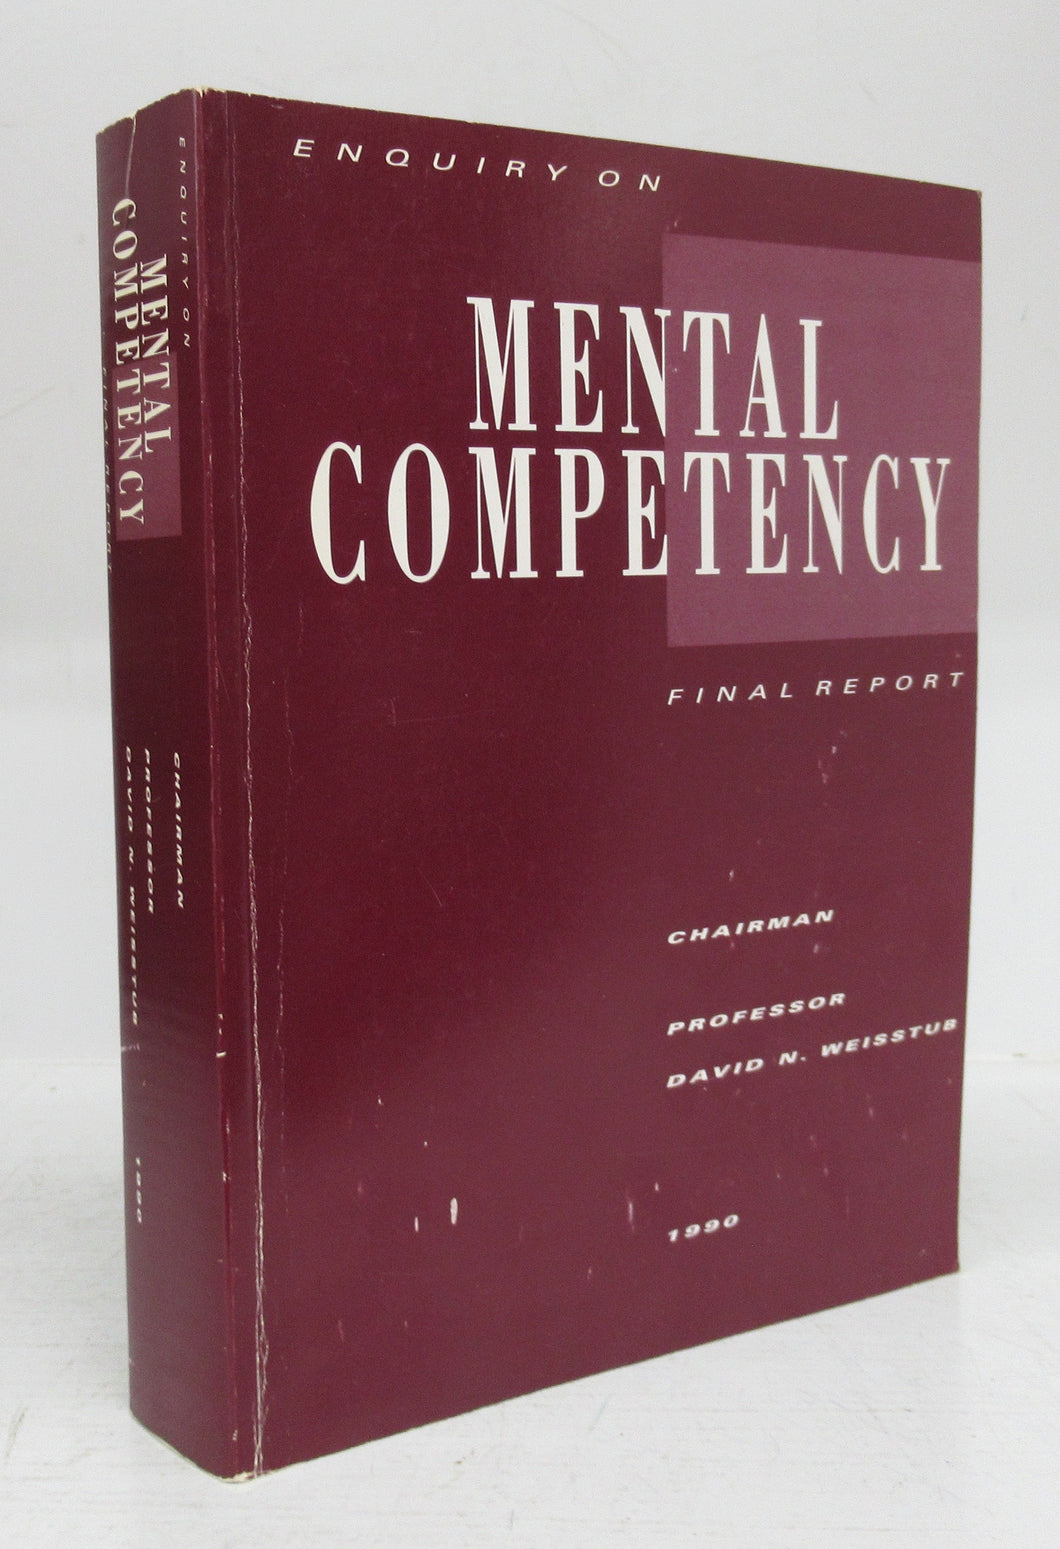 Enquiry on Mental Competency: Final Report